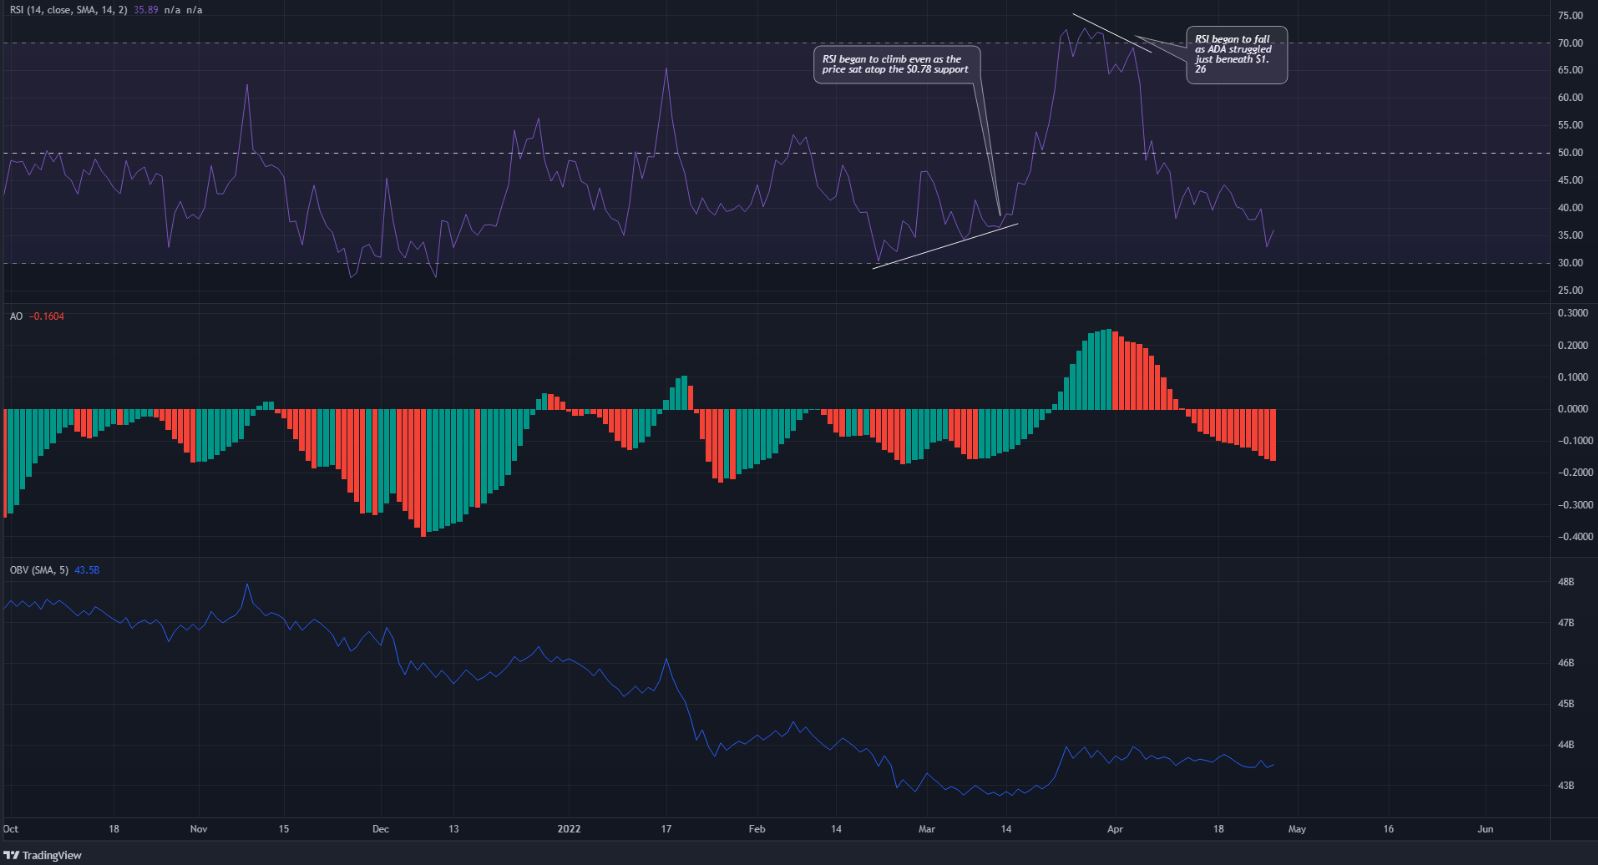 Long term investors not encouraged by the price chart of Cardano as technicals show bearishness